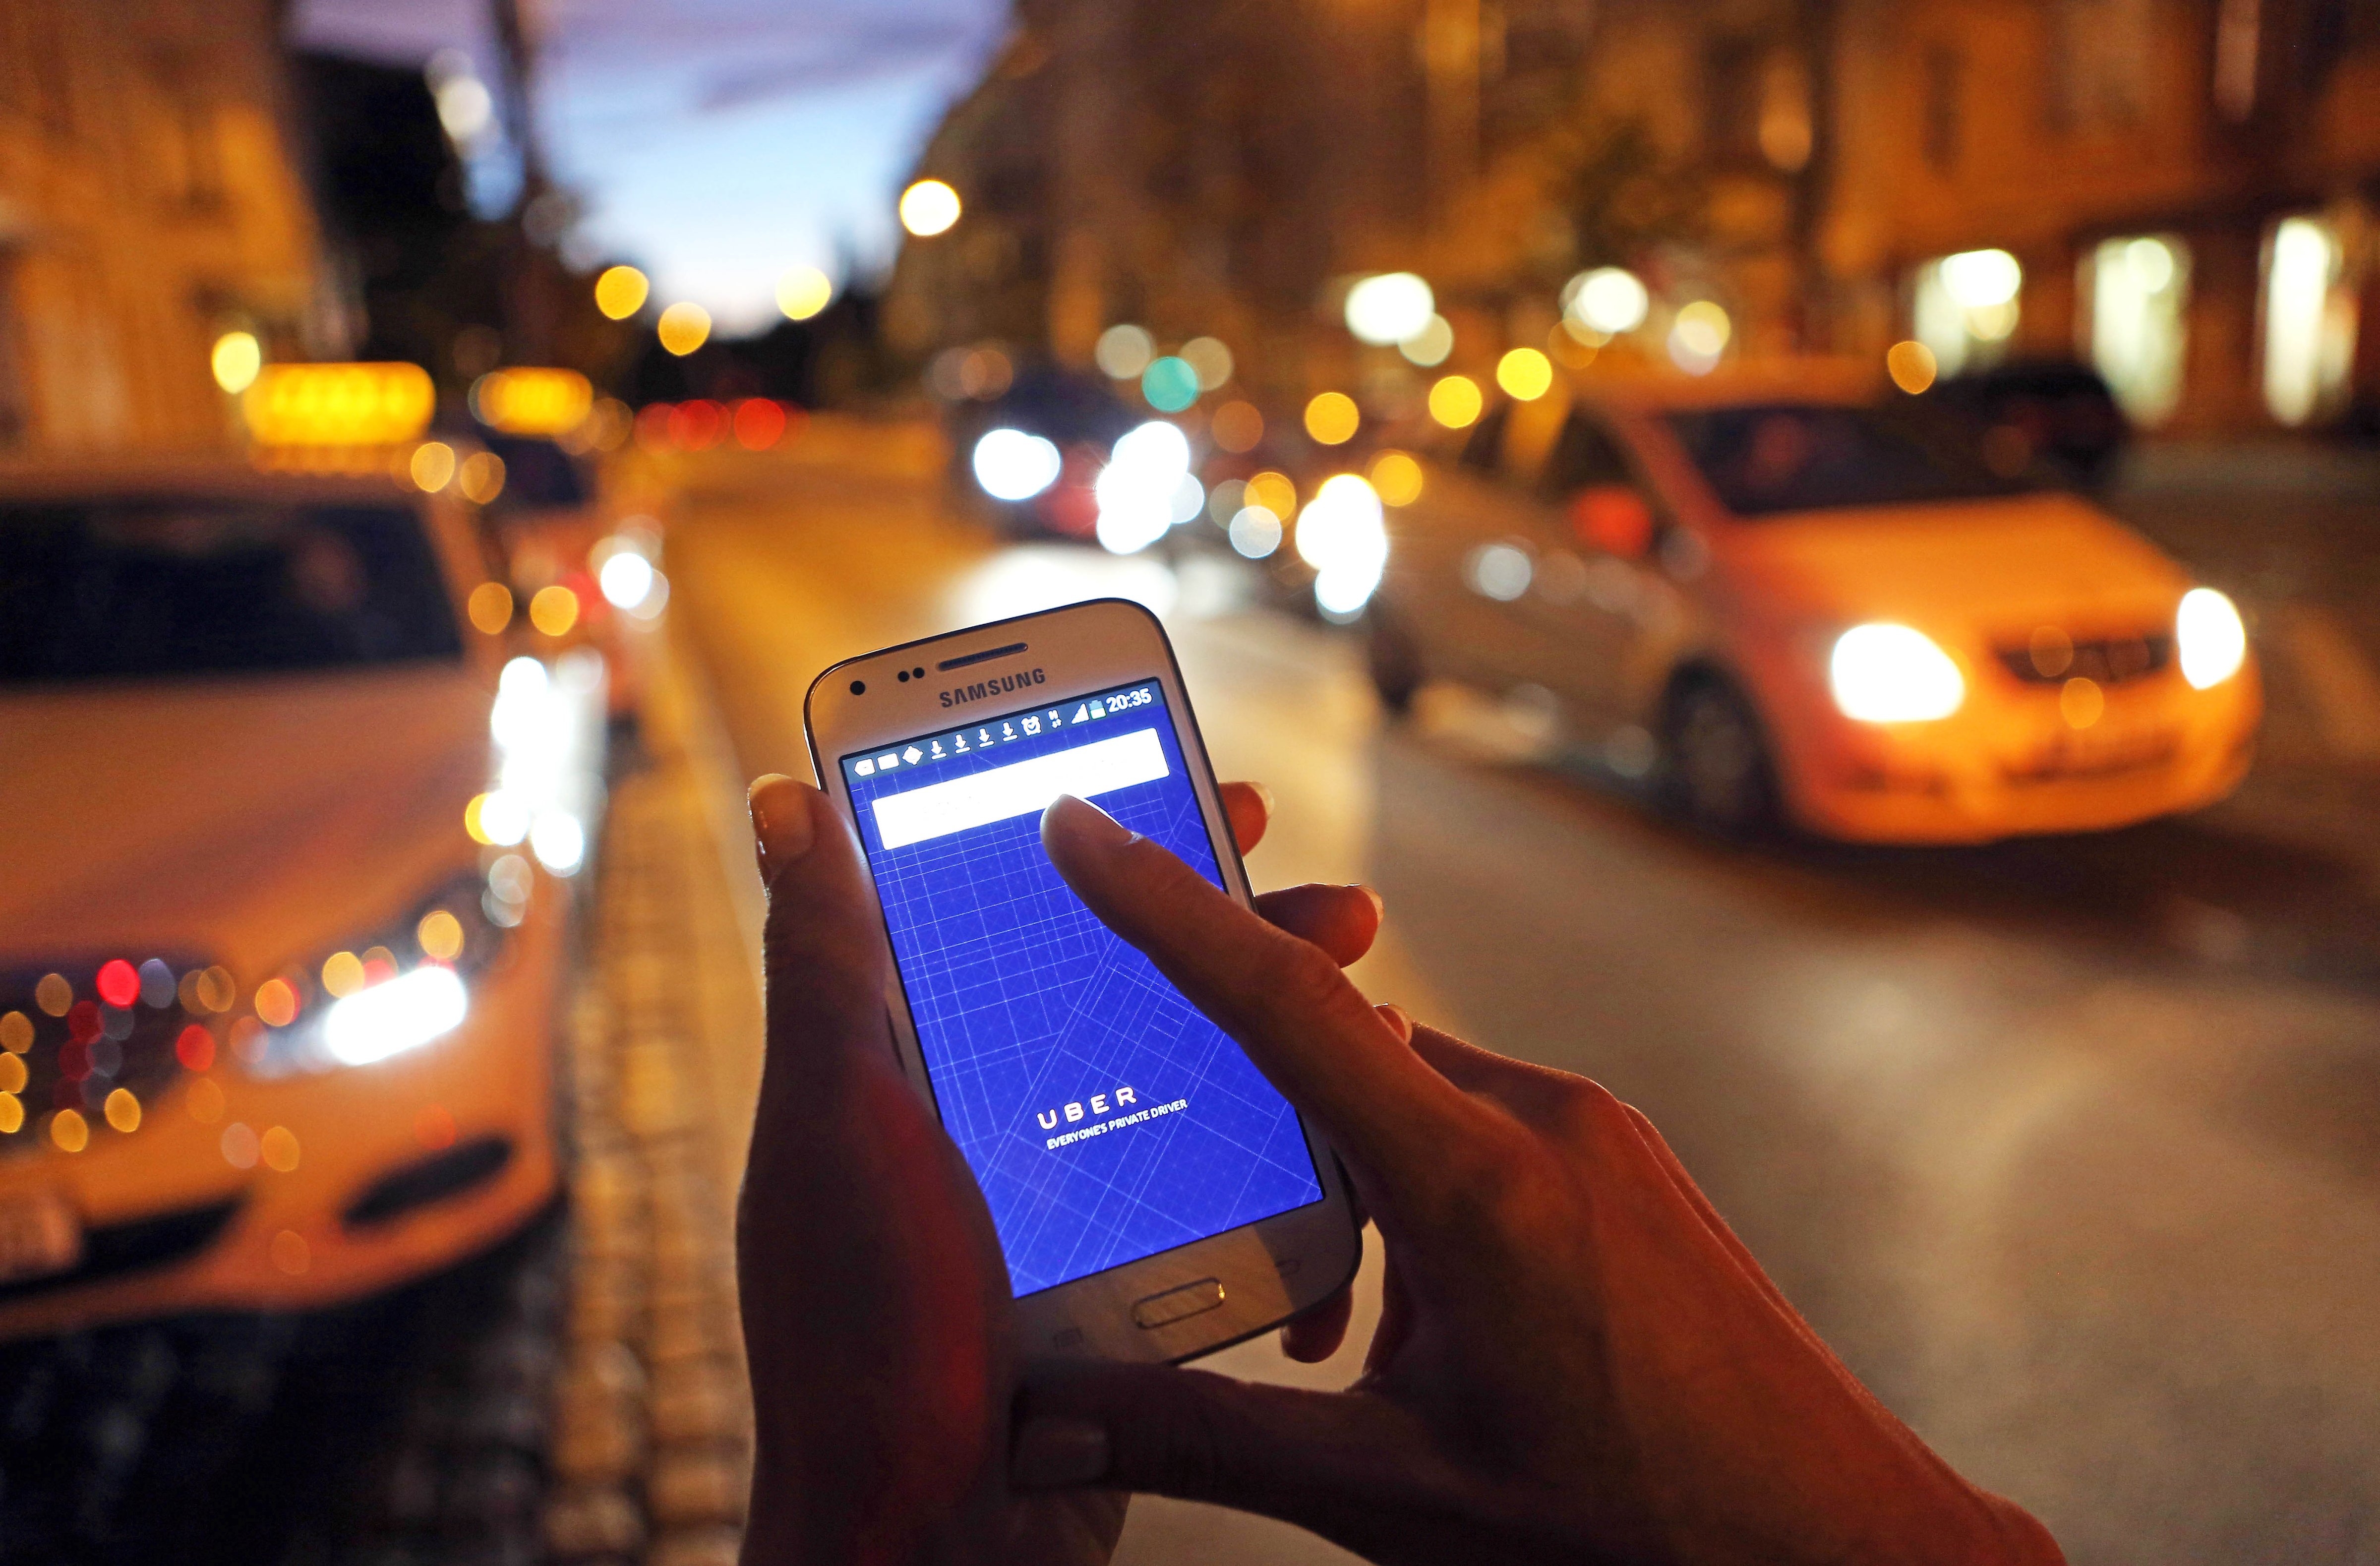 A woman uses the Uber app on an Samsung smartphone on Sept. 2, 2014 in Berlin. (Adam Berry—Getty Images)